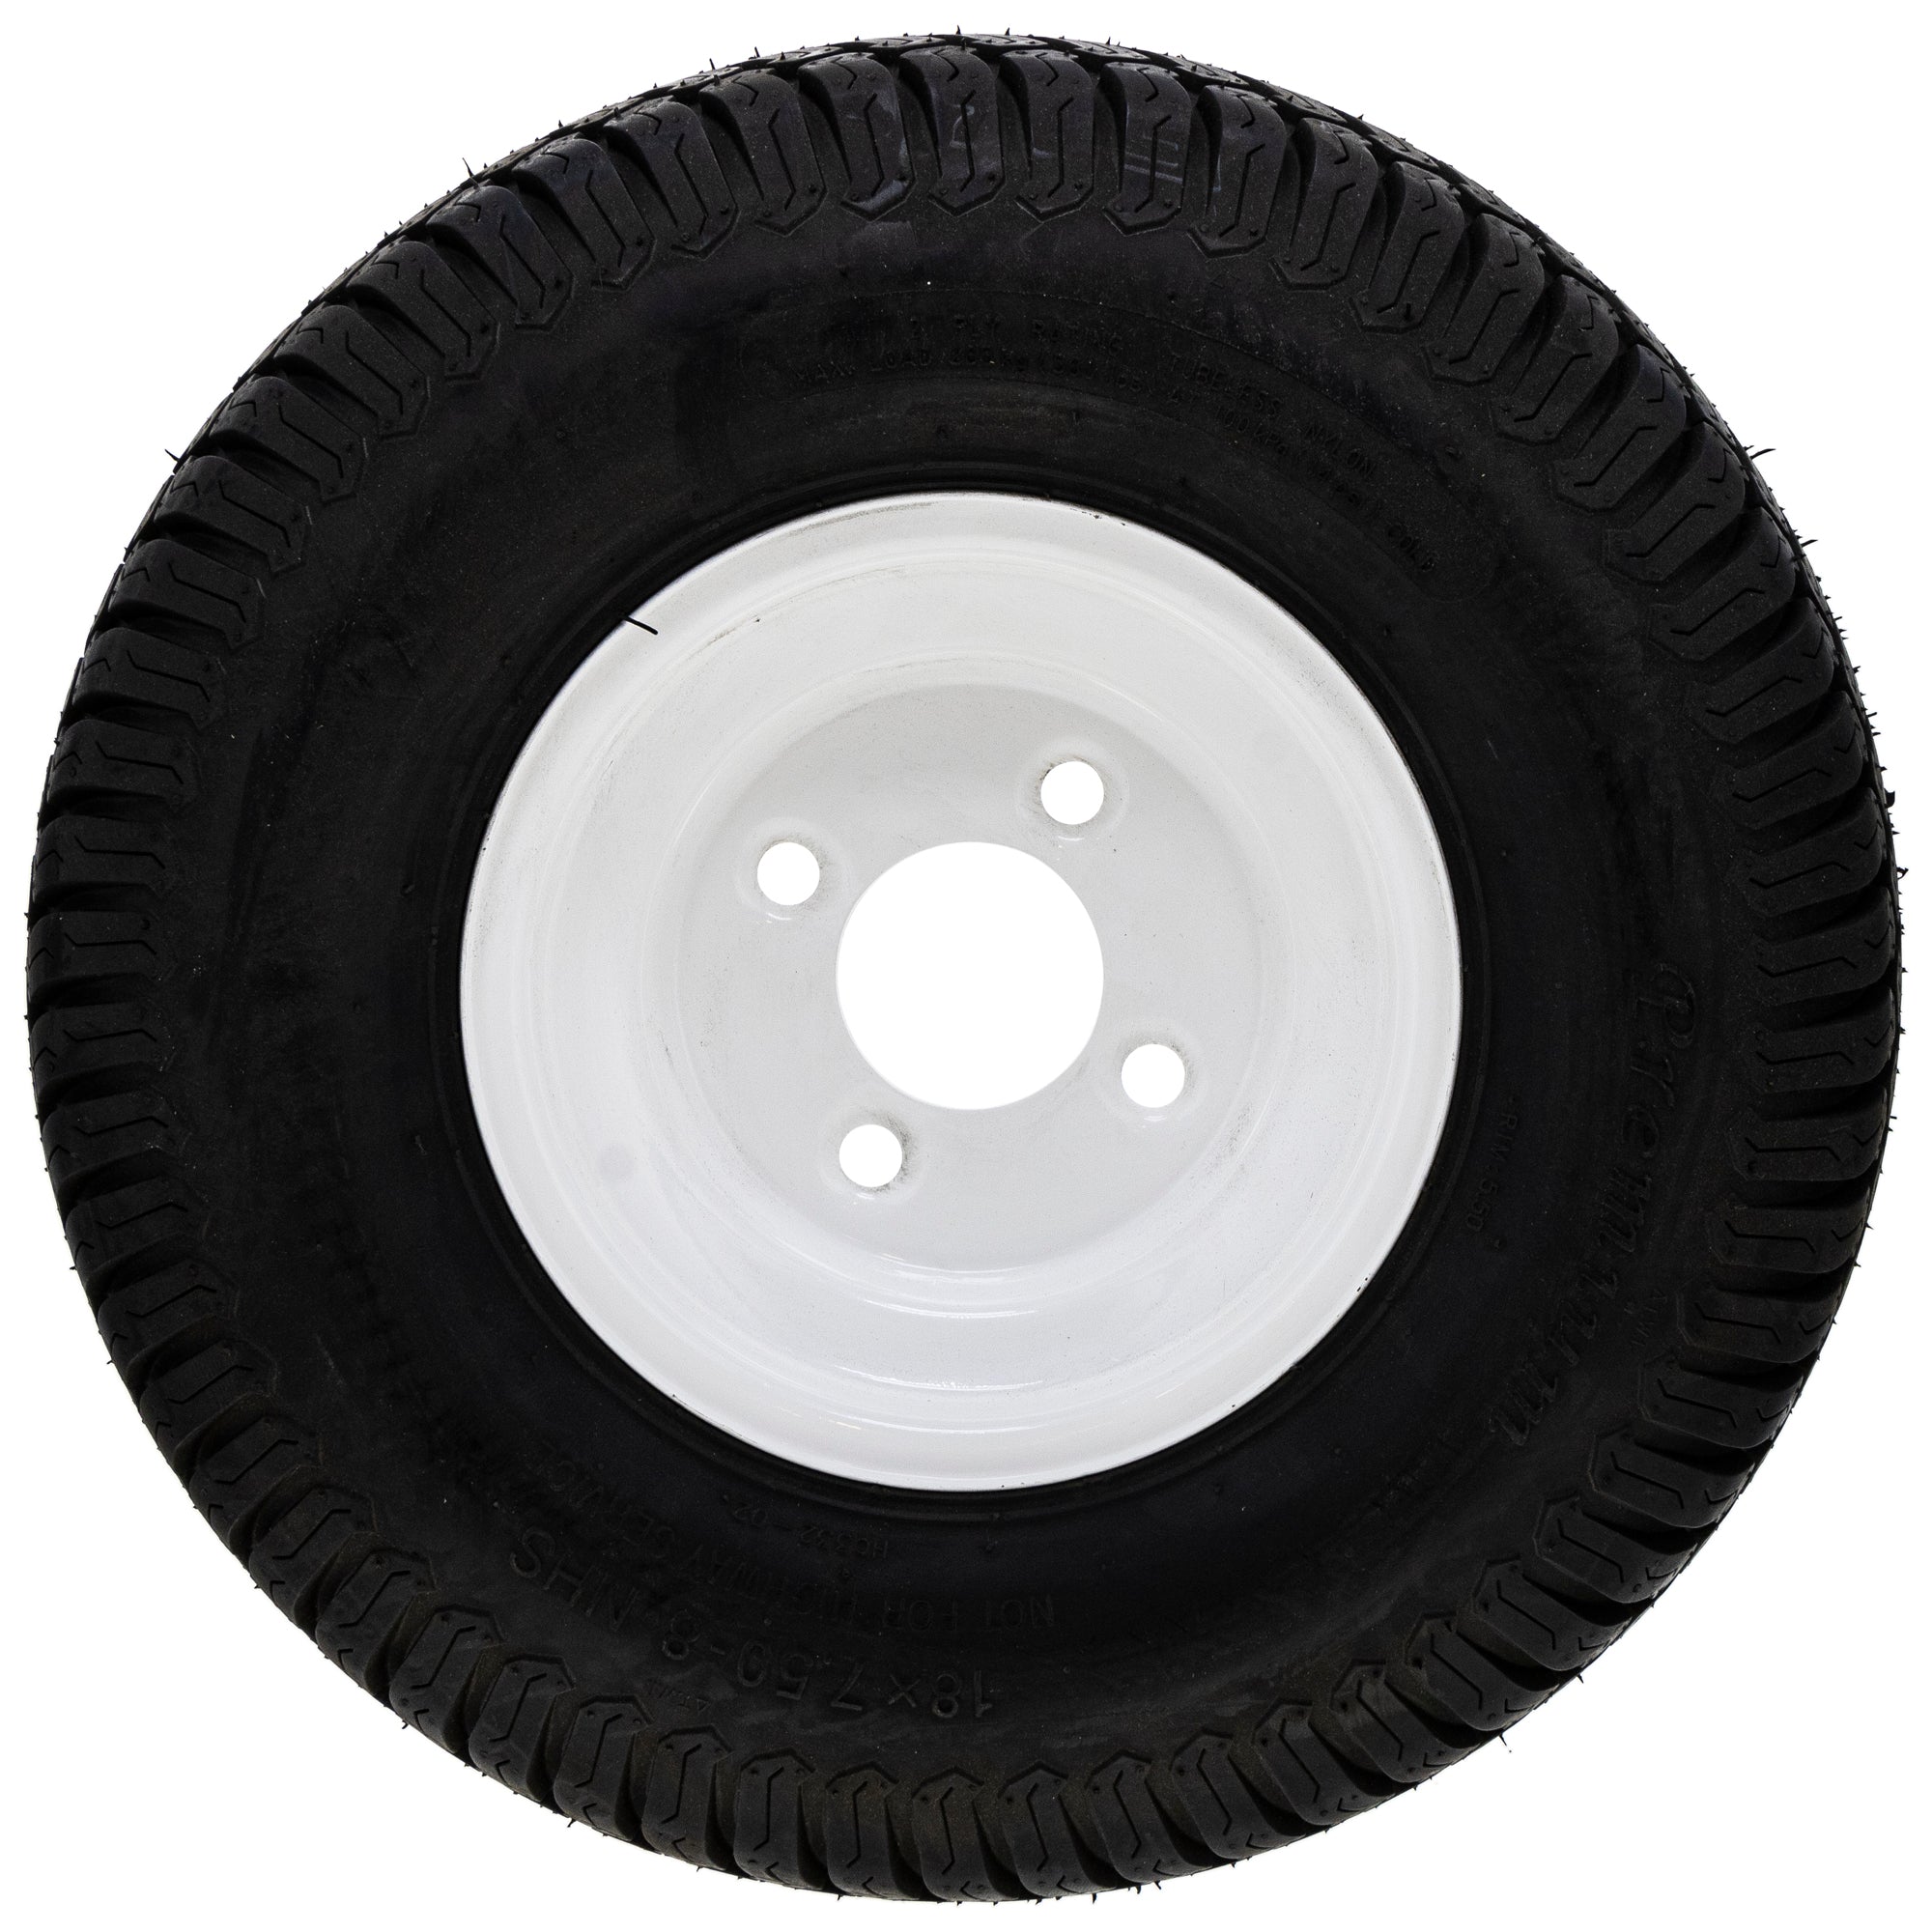 Exmark 131-3671 2 Tire and Wheel Set | Mow The Lawn